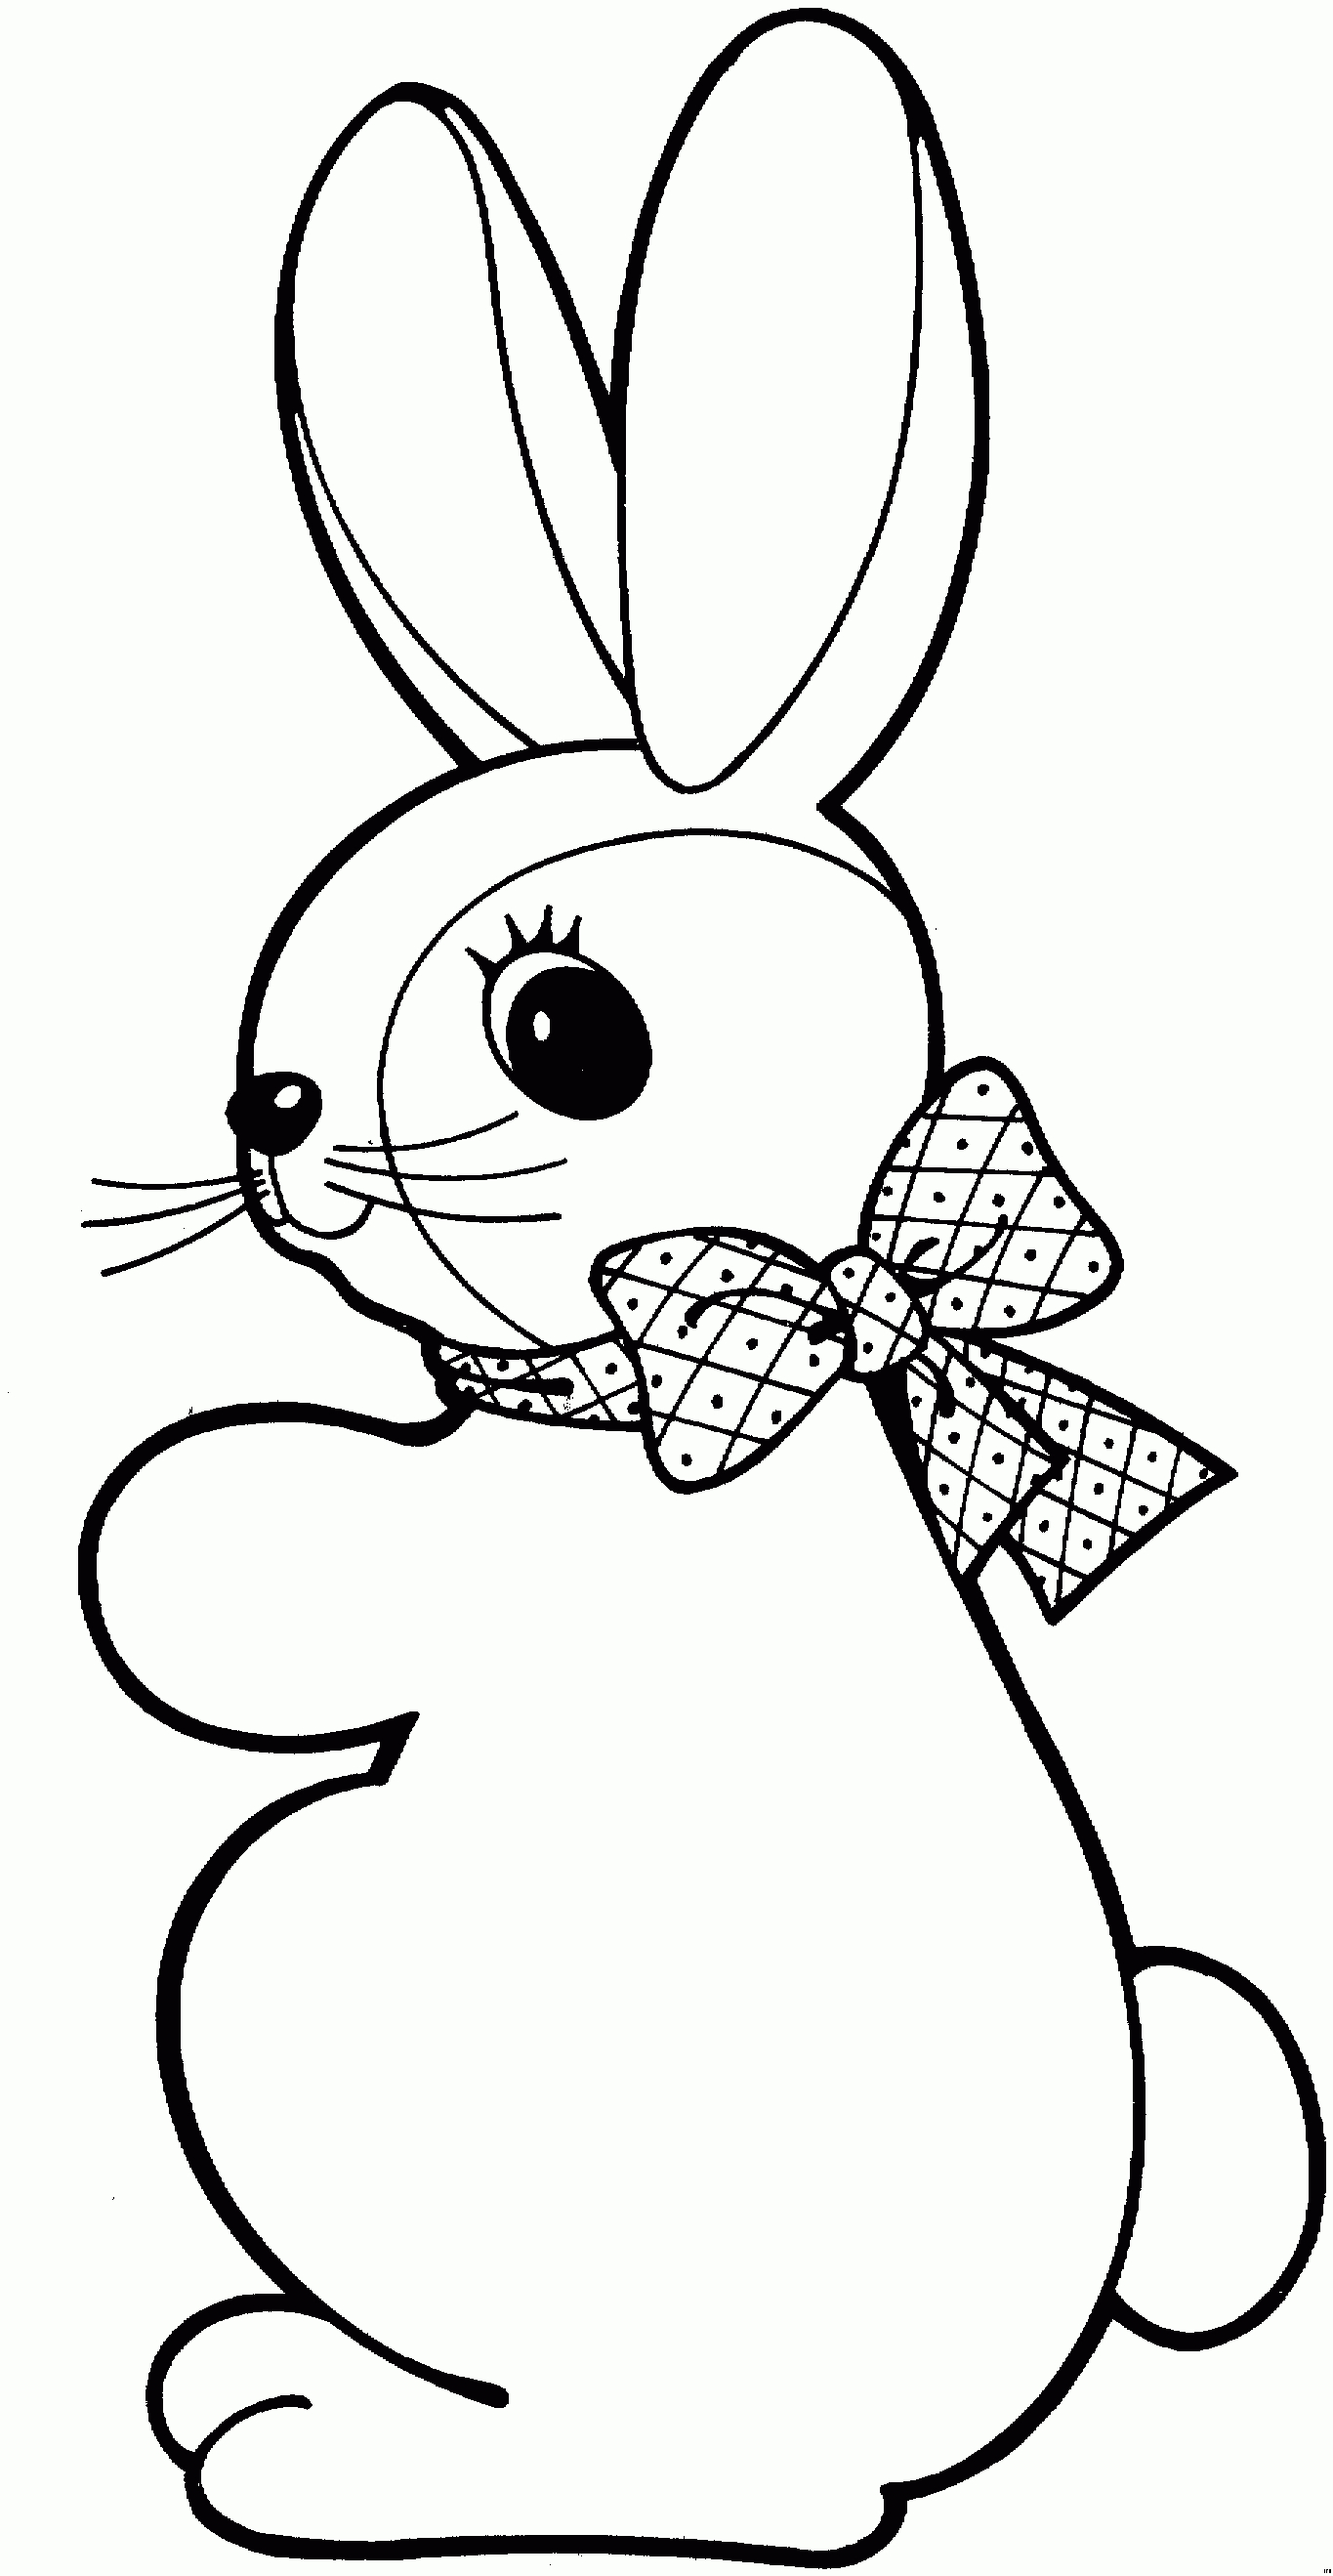 Rabbit free to color for children - Rabbit Kids Coloring Pages